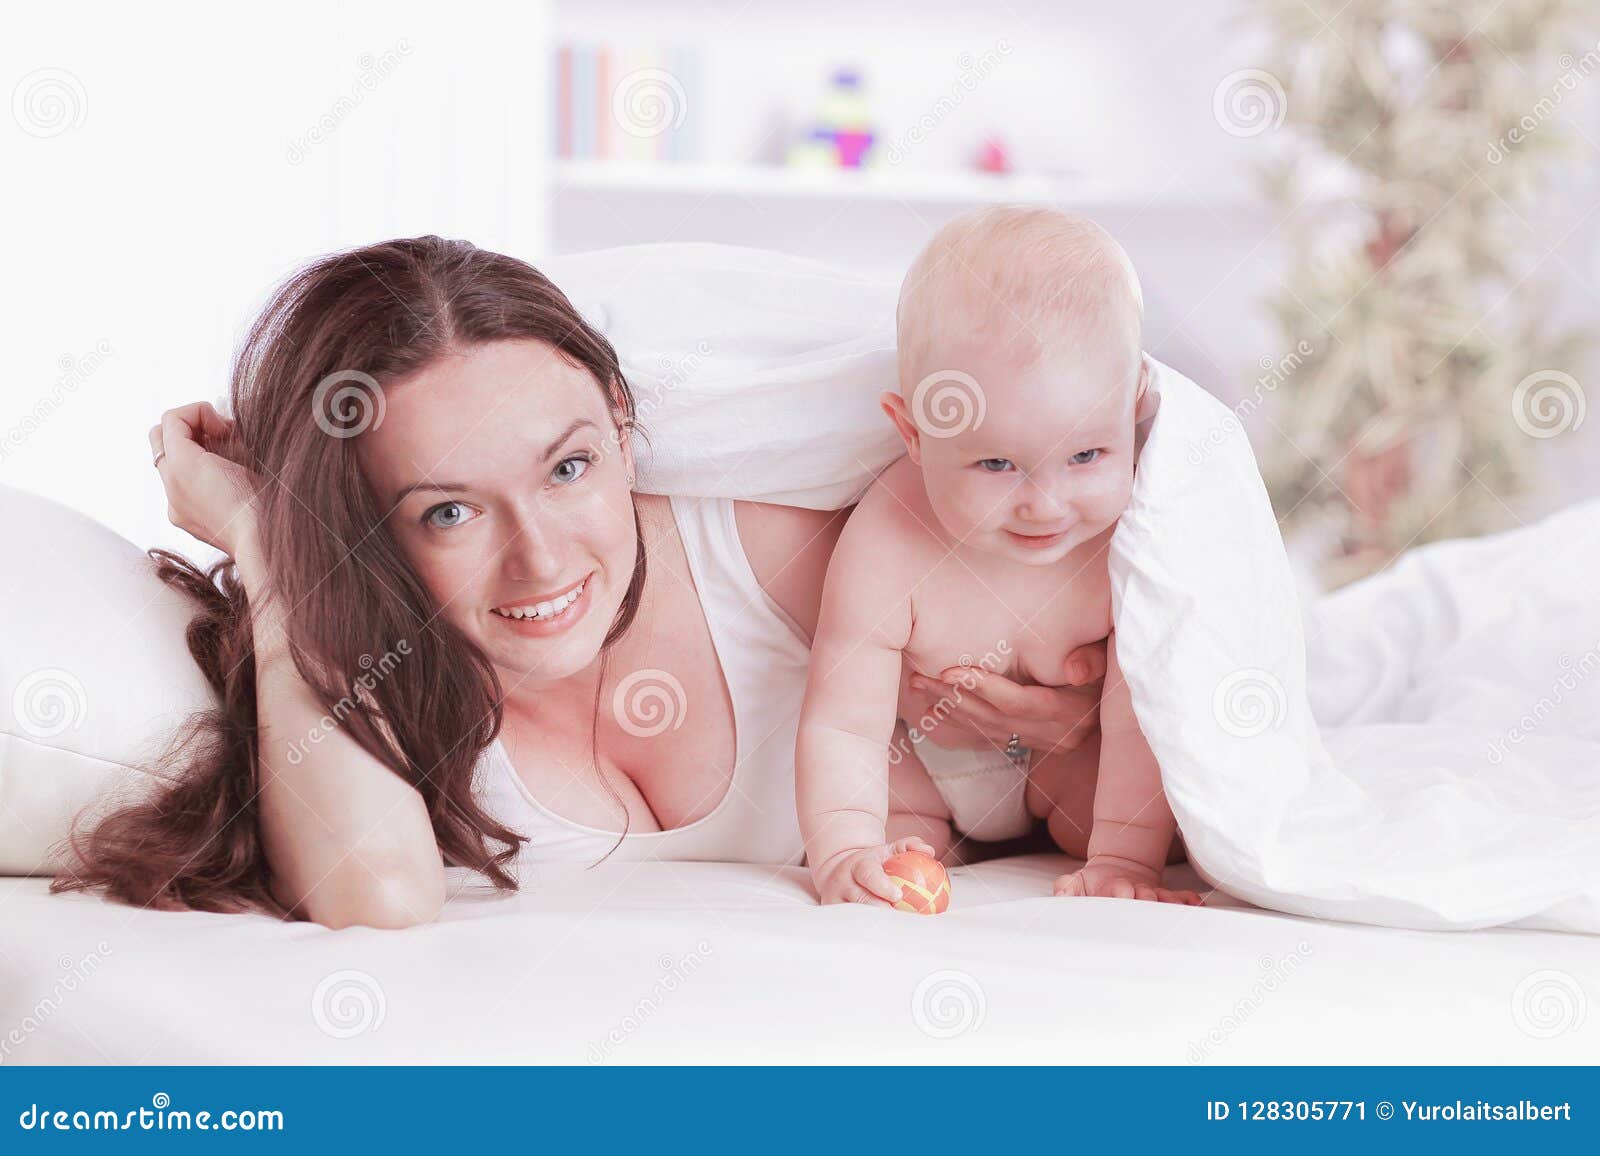 Mom Plays with the Baby Lying on the Bed Stock Image - Image of blanket ...